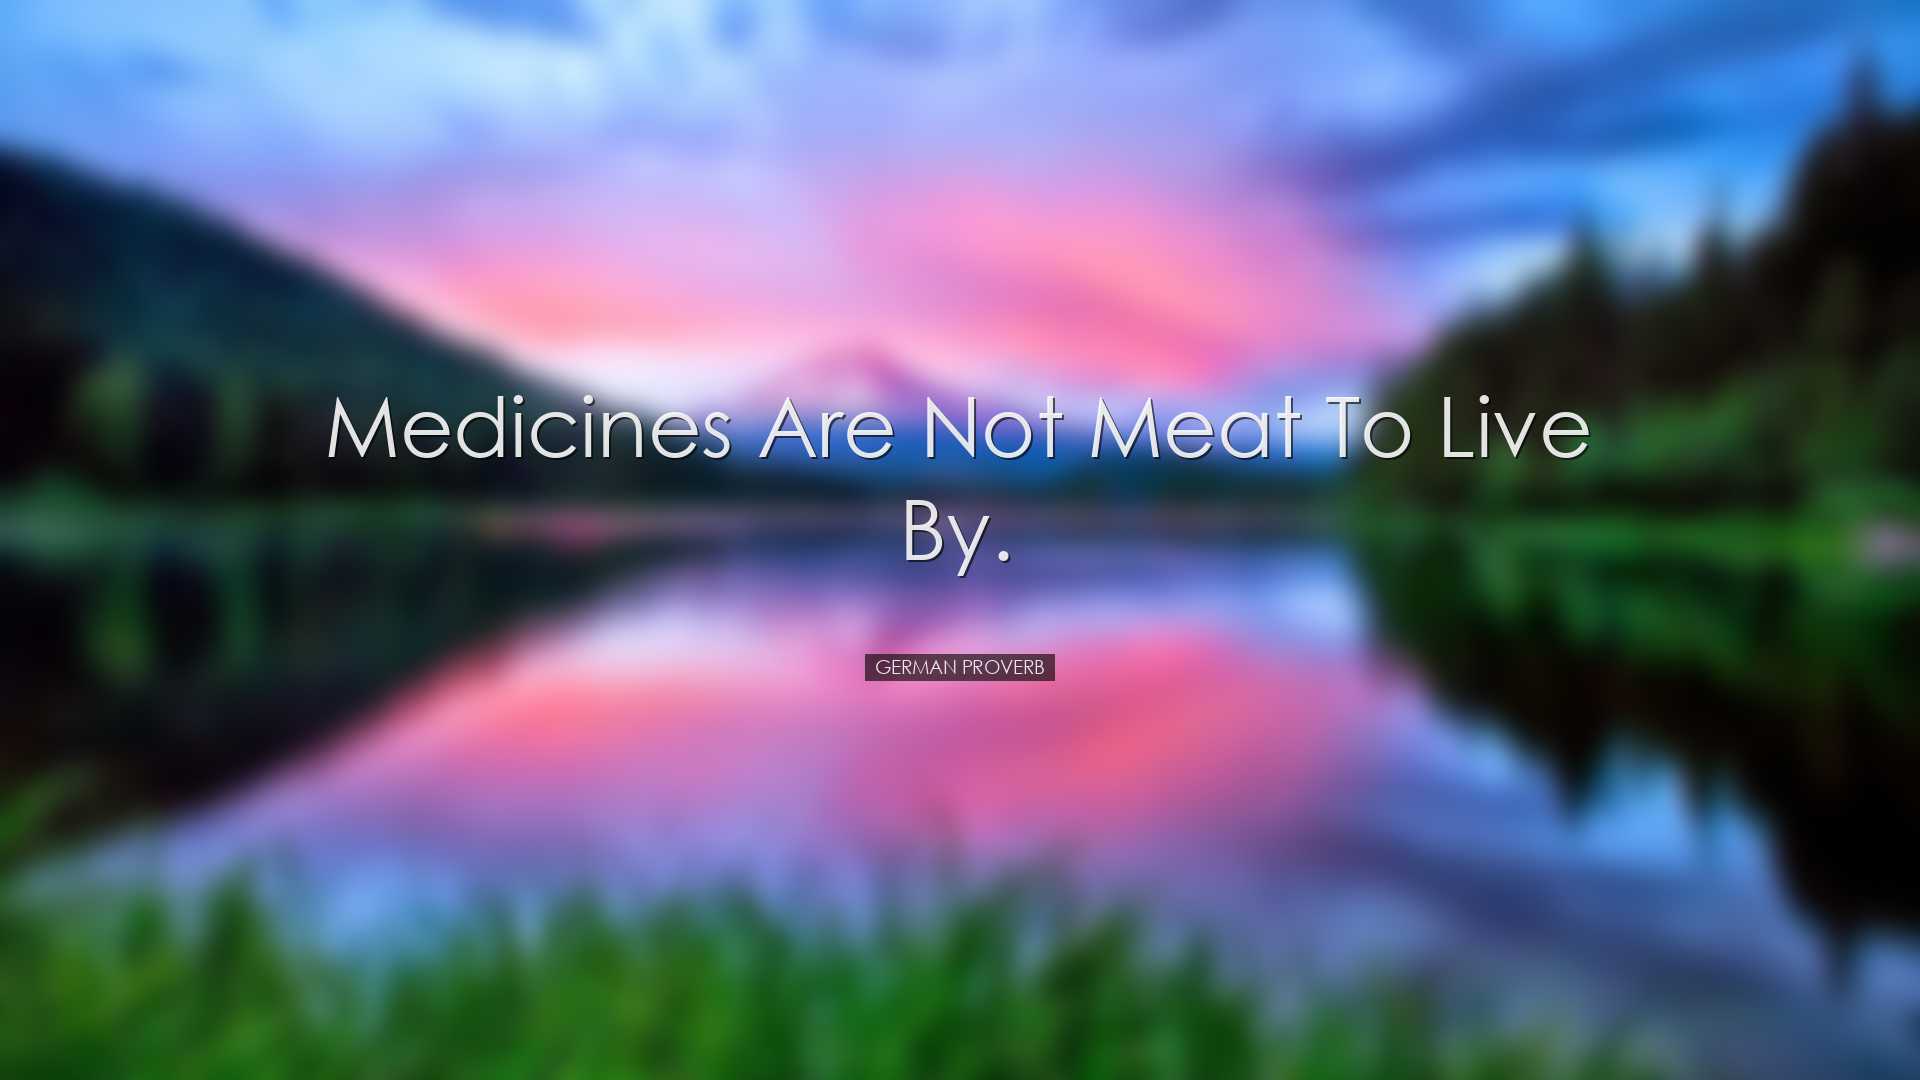 Medicines are not meat to live by. - German proverb